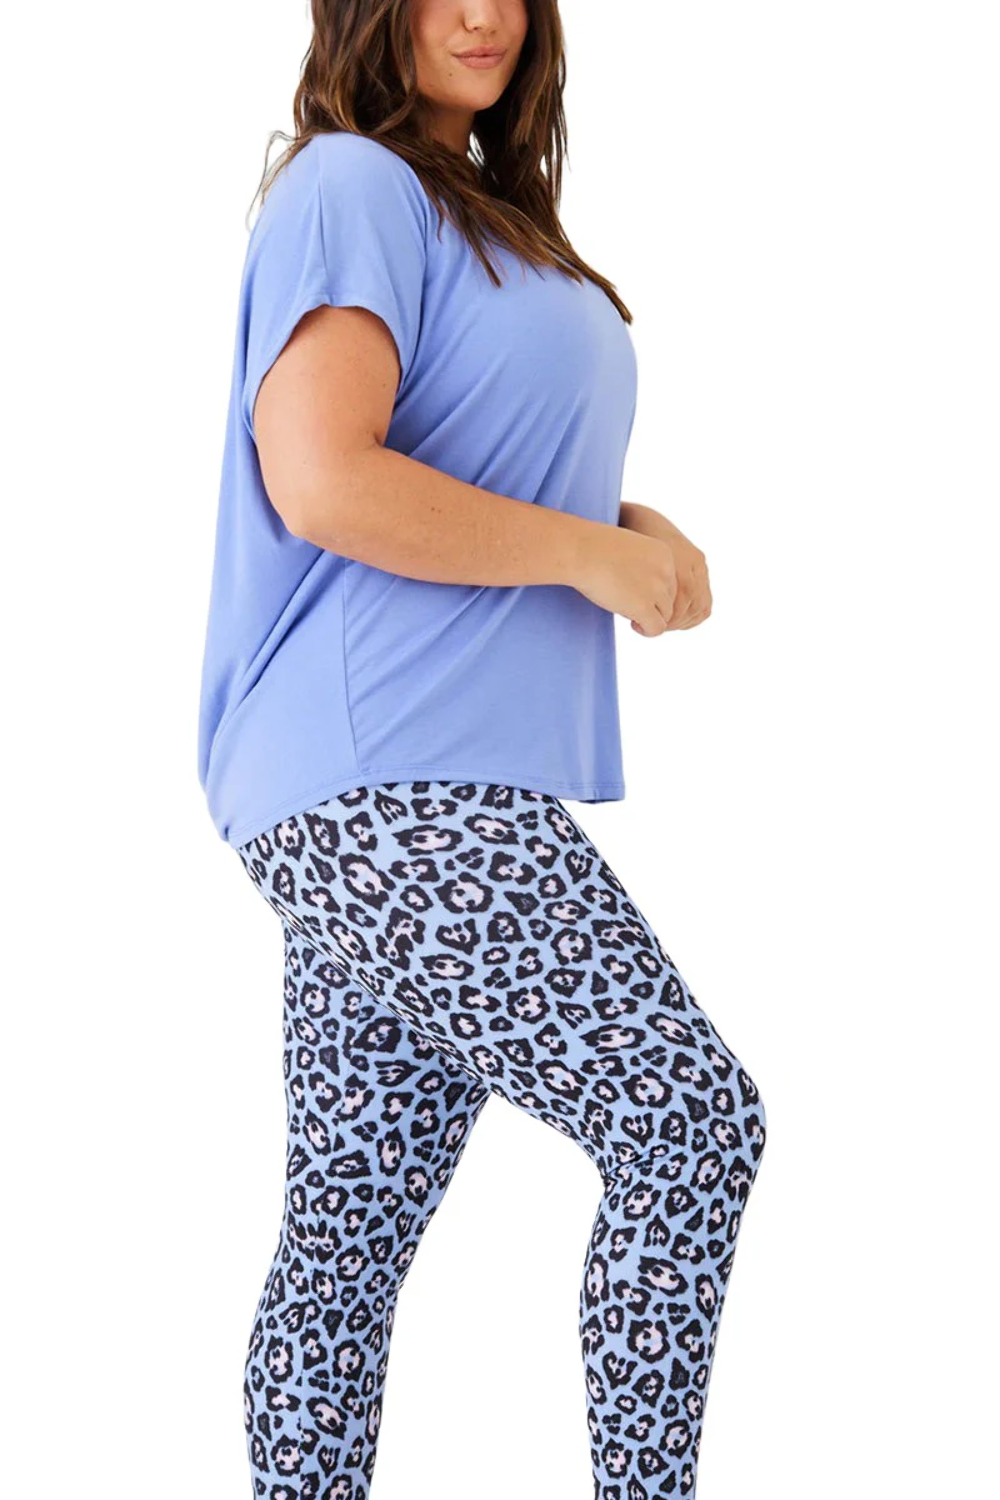 Onzie Hot Yoga Wear Drop Back Top 3056 more colors to choose from!